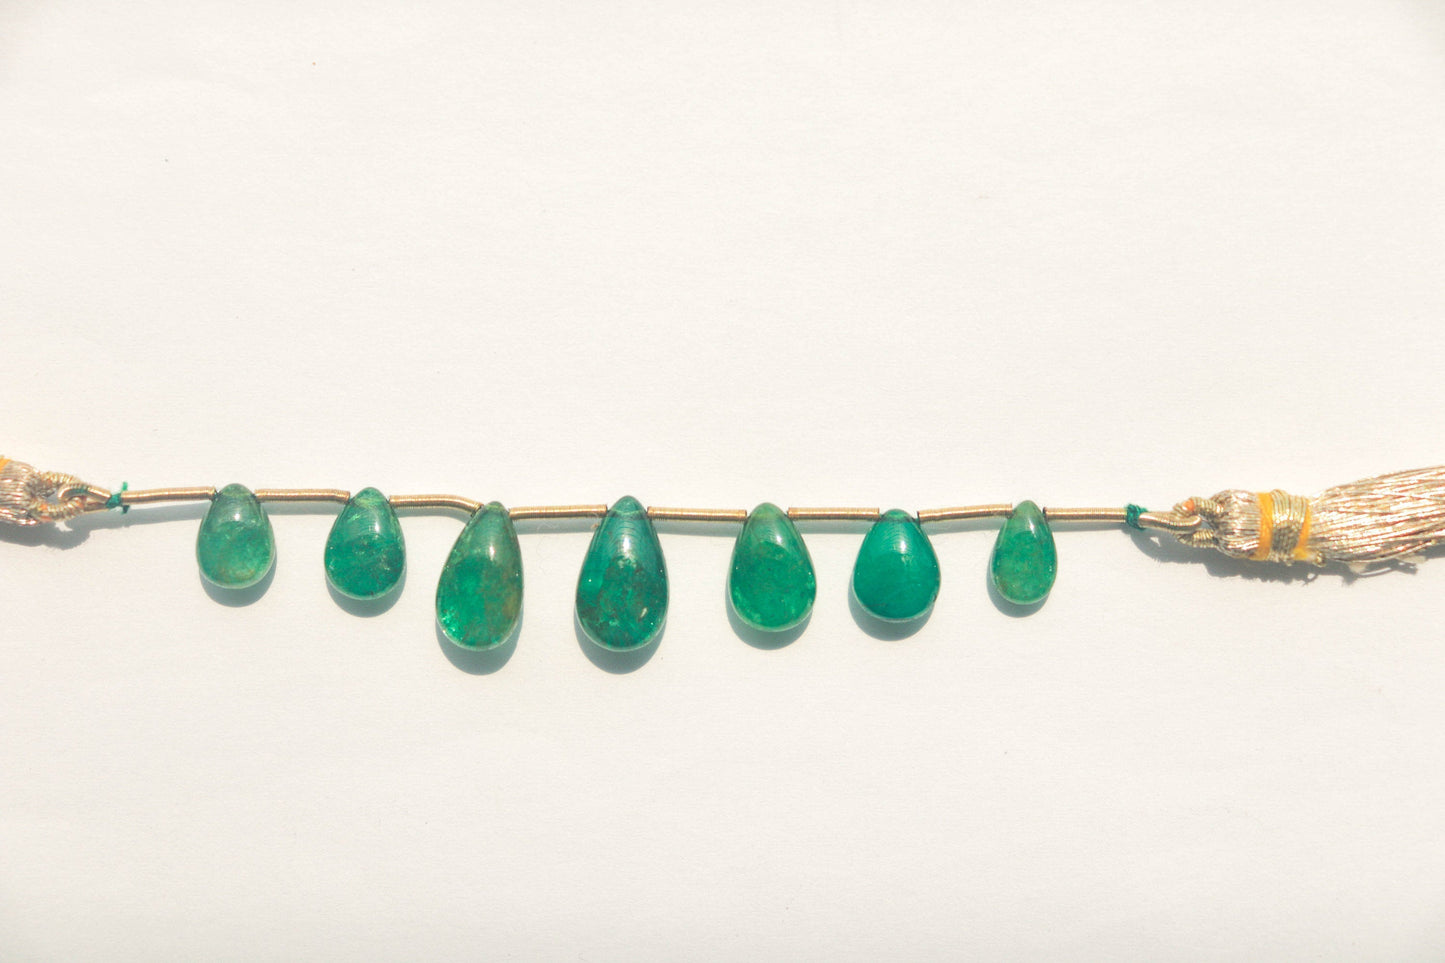 Natural ZAMBIAN EMERALD Smooth Pear Briolette | 6x8mm - 7x12mm | 7 Pieces | Natural Gemstone for jewelry making | Beadsforyourjewellery Beadsforyourjewelry